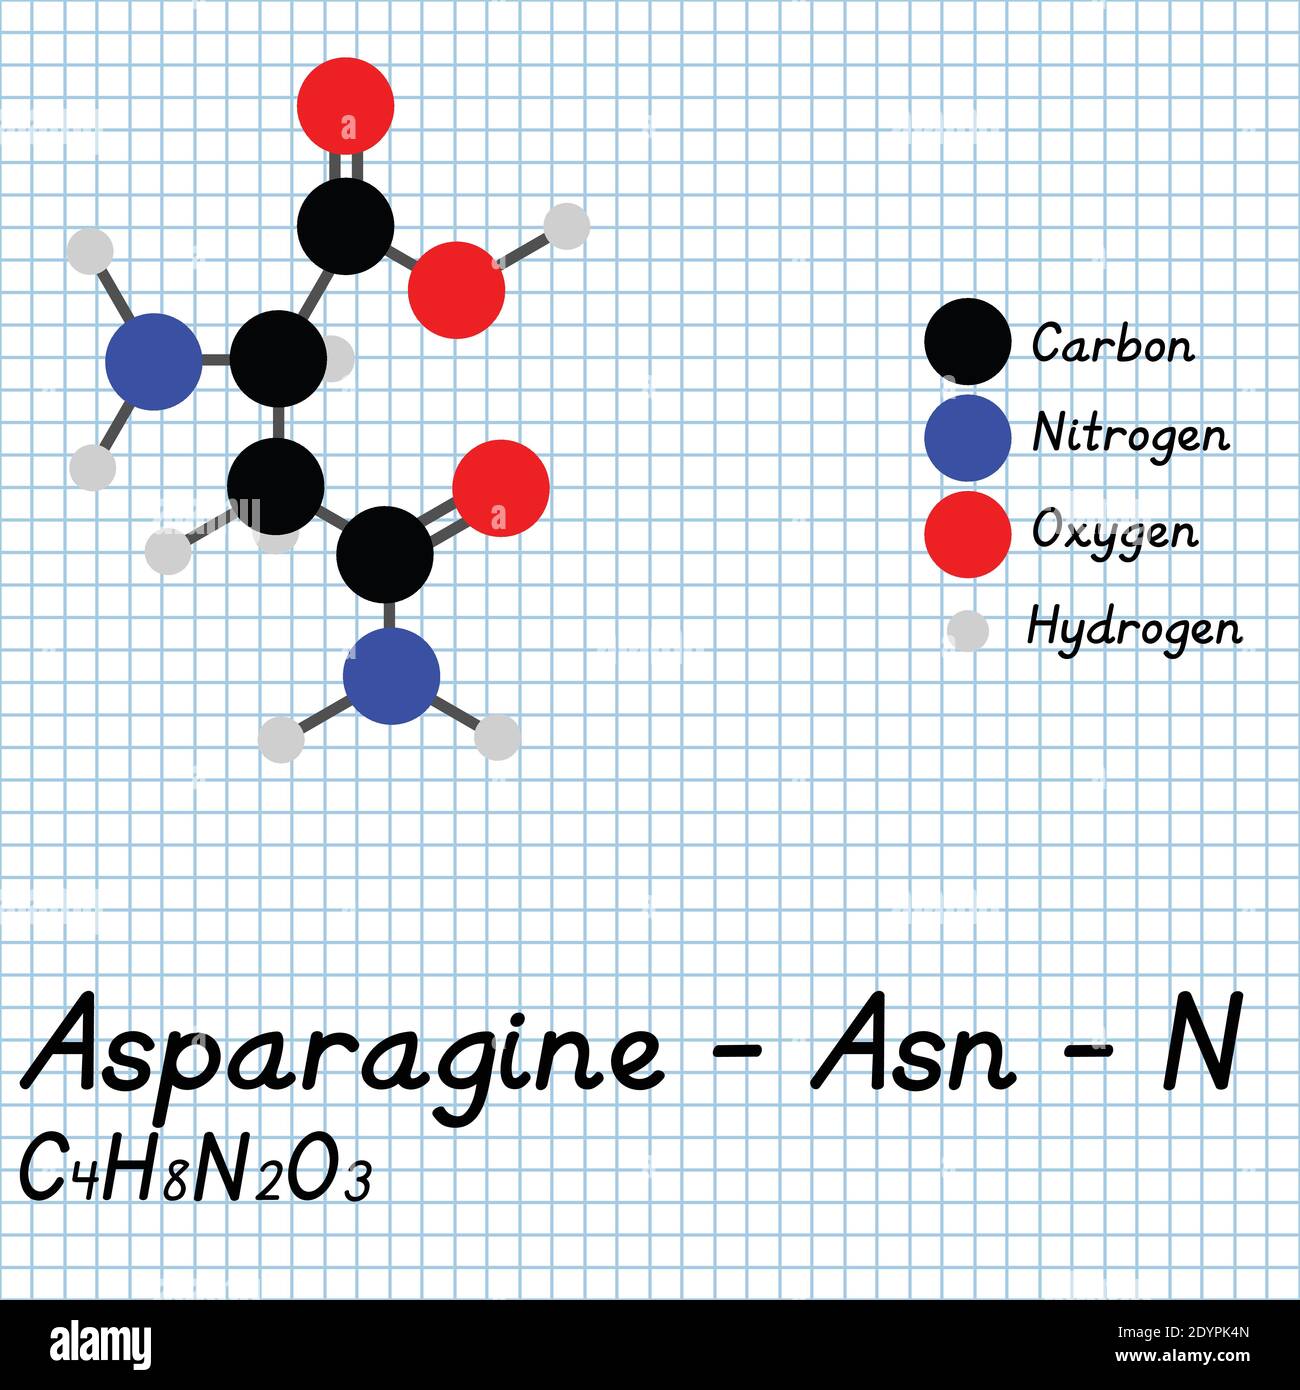 Asparagine - Asn - N Amino Acid molecular formula and chemical structure . 2D Ball and stick model on school paper sheet background. EPS10 Stock Vector